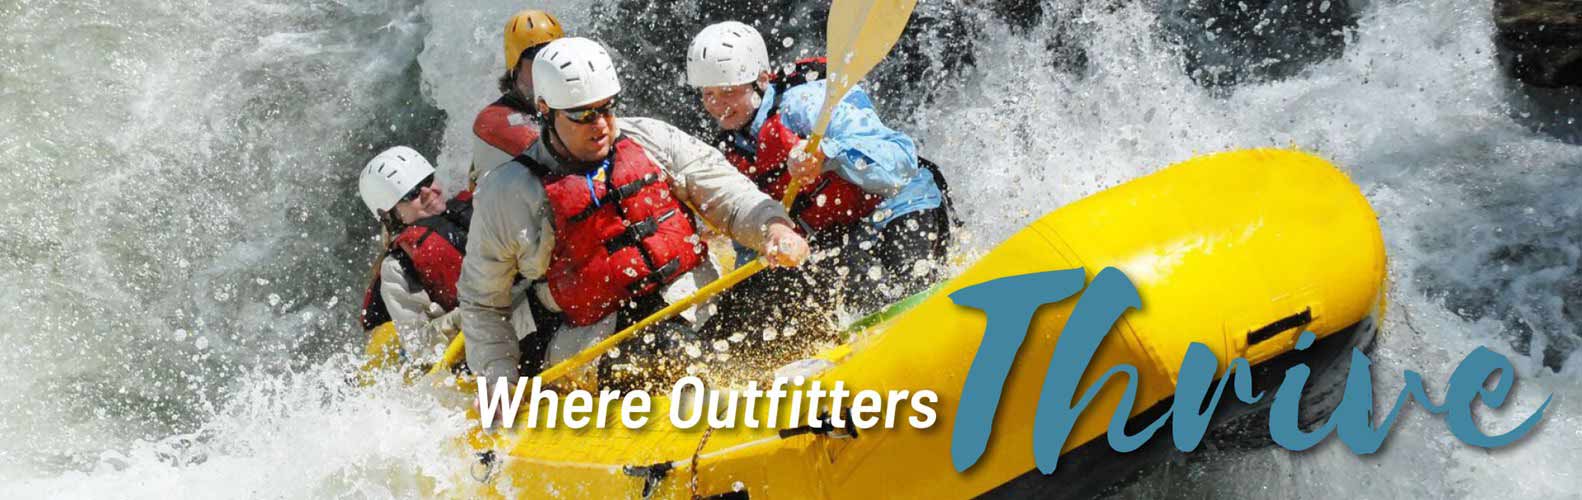 Guided Whitewater Rafting